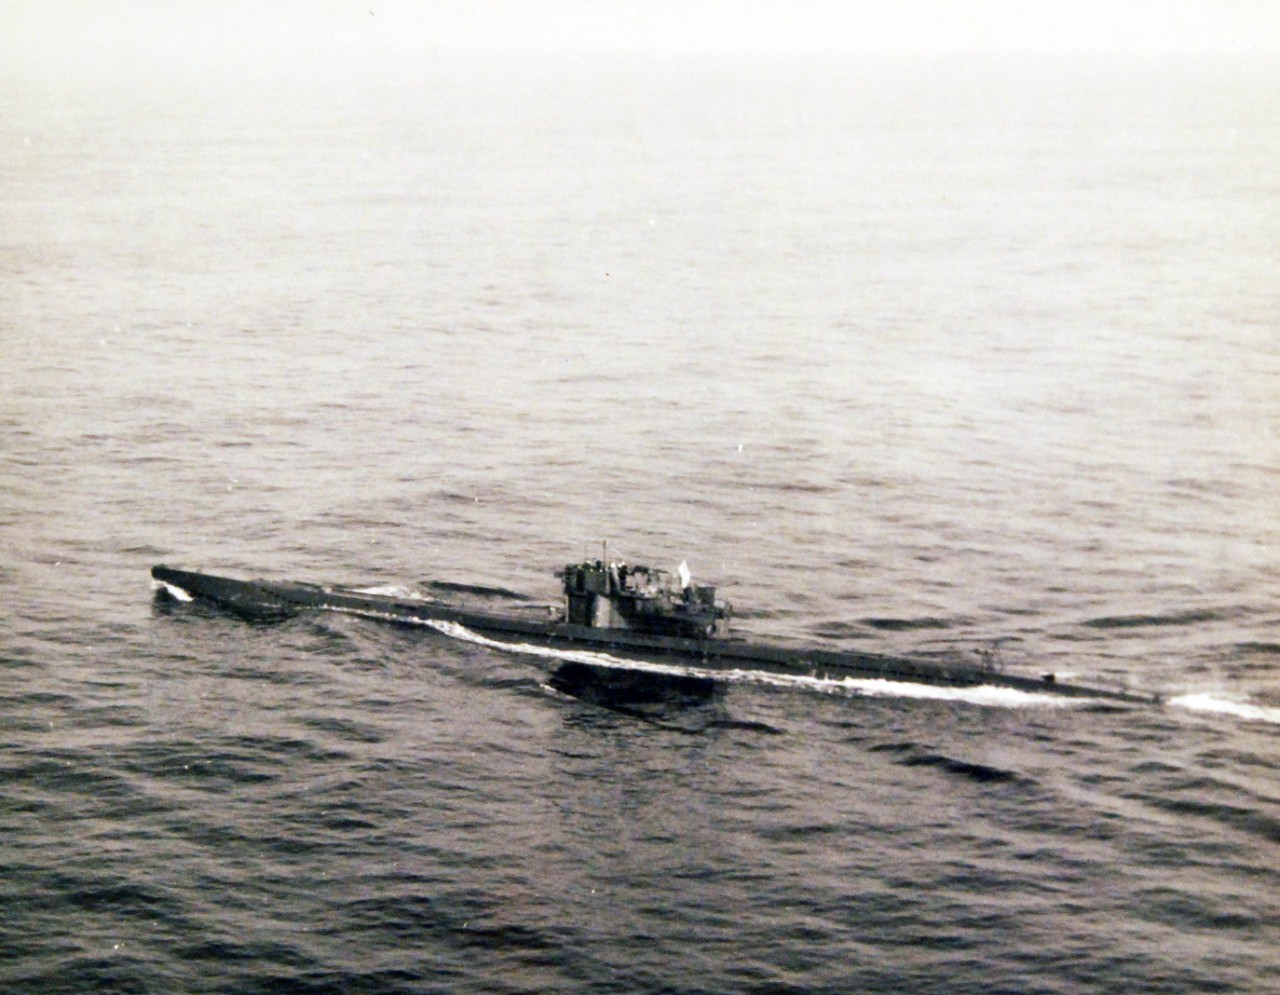 80-G-320286: Surrender of German U-boats, WWII.  U-249 surrendering on May 9, 1945.   U-249 was the first U-boat to surrender after Germany’s surrender.   The submarine surrendered to a PB4Y-1 “Liberator” from FAW-7 off Scilly Islands.  Official U.S. Navy photograph, now in the collections of the National Archives.  (2017/07/18).